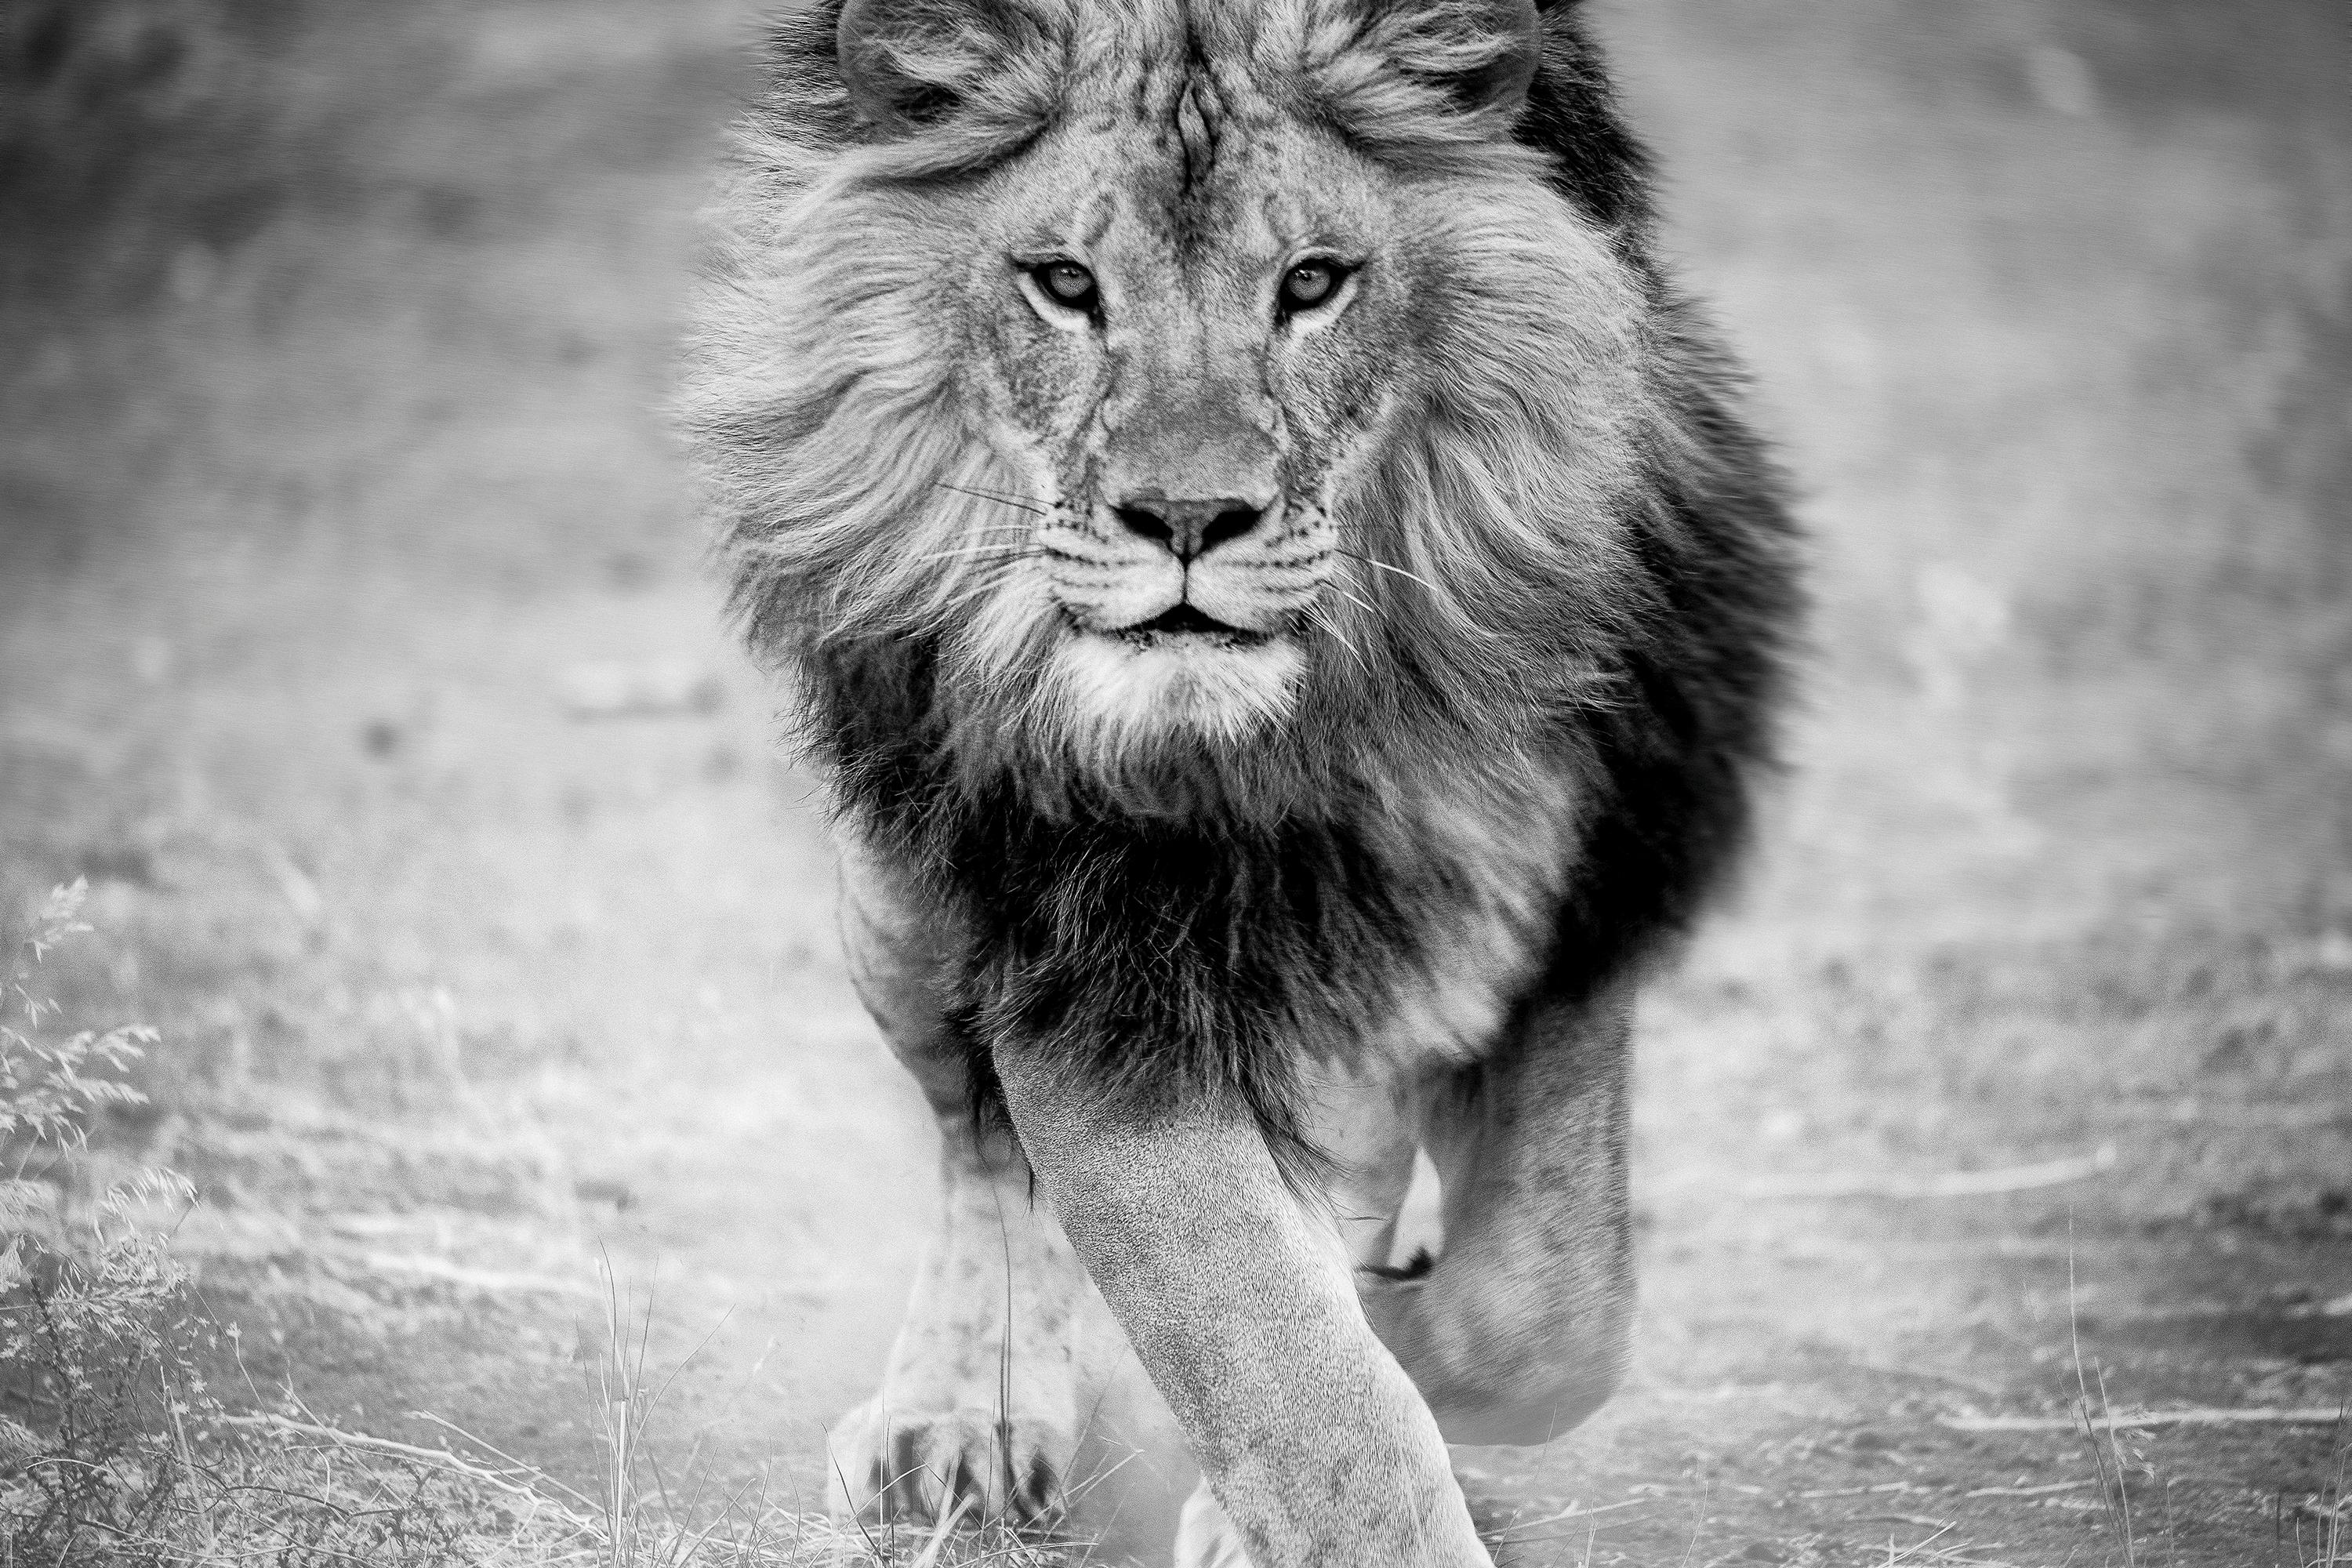 Shane Russeck Black and White Photograph - "Panthera Leo" 36x48 - Black & White Photography, African Lion Photograph Art